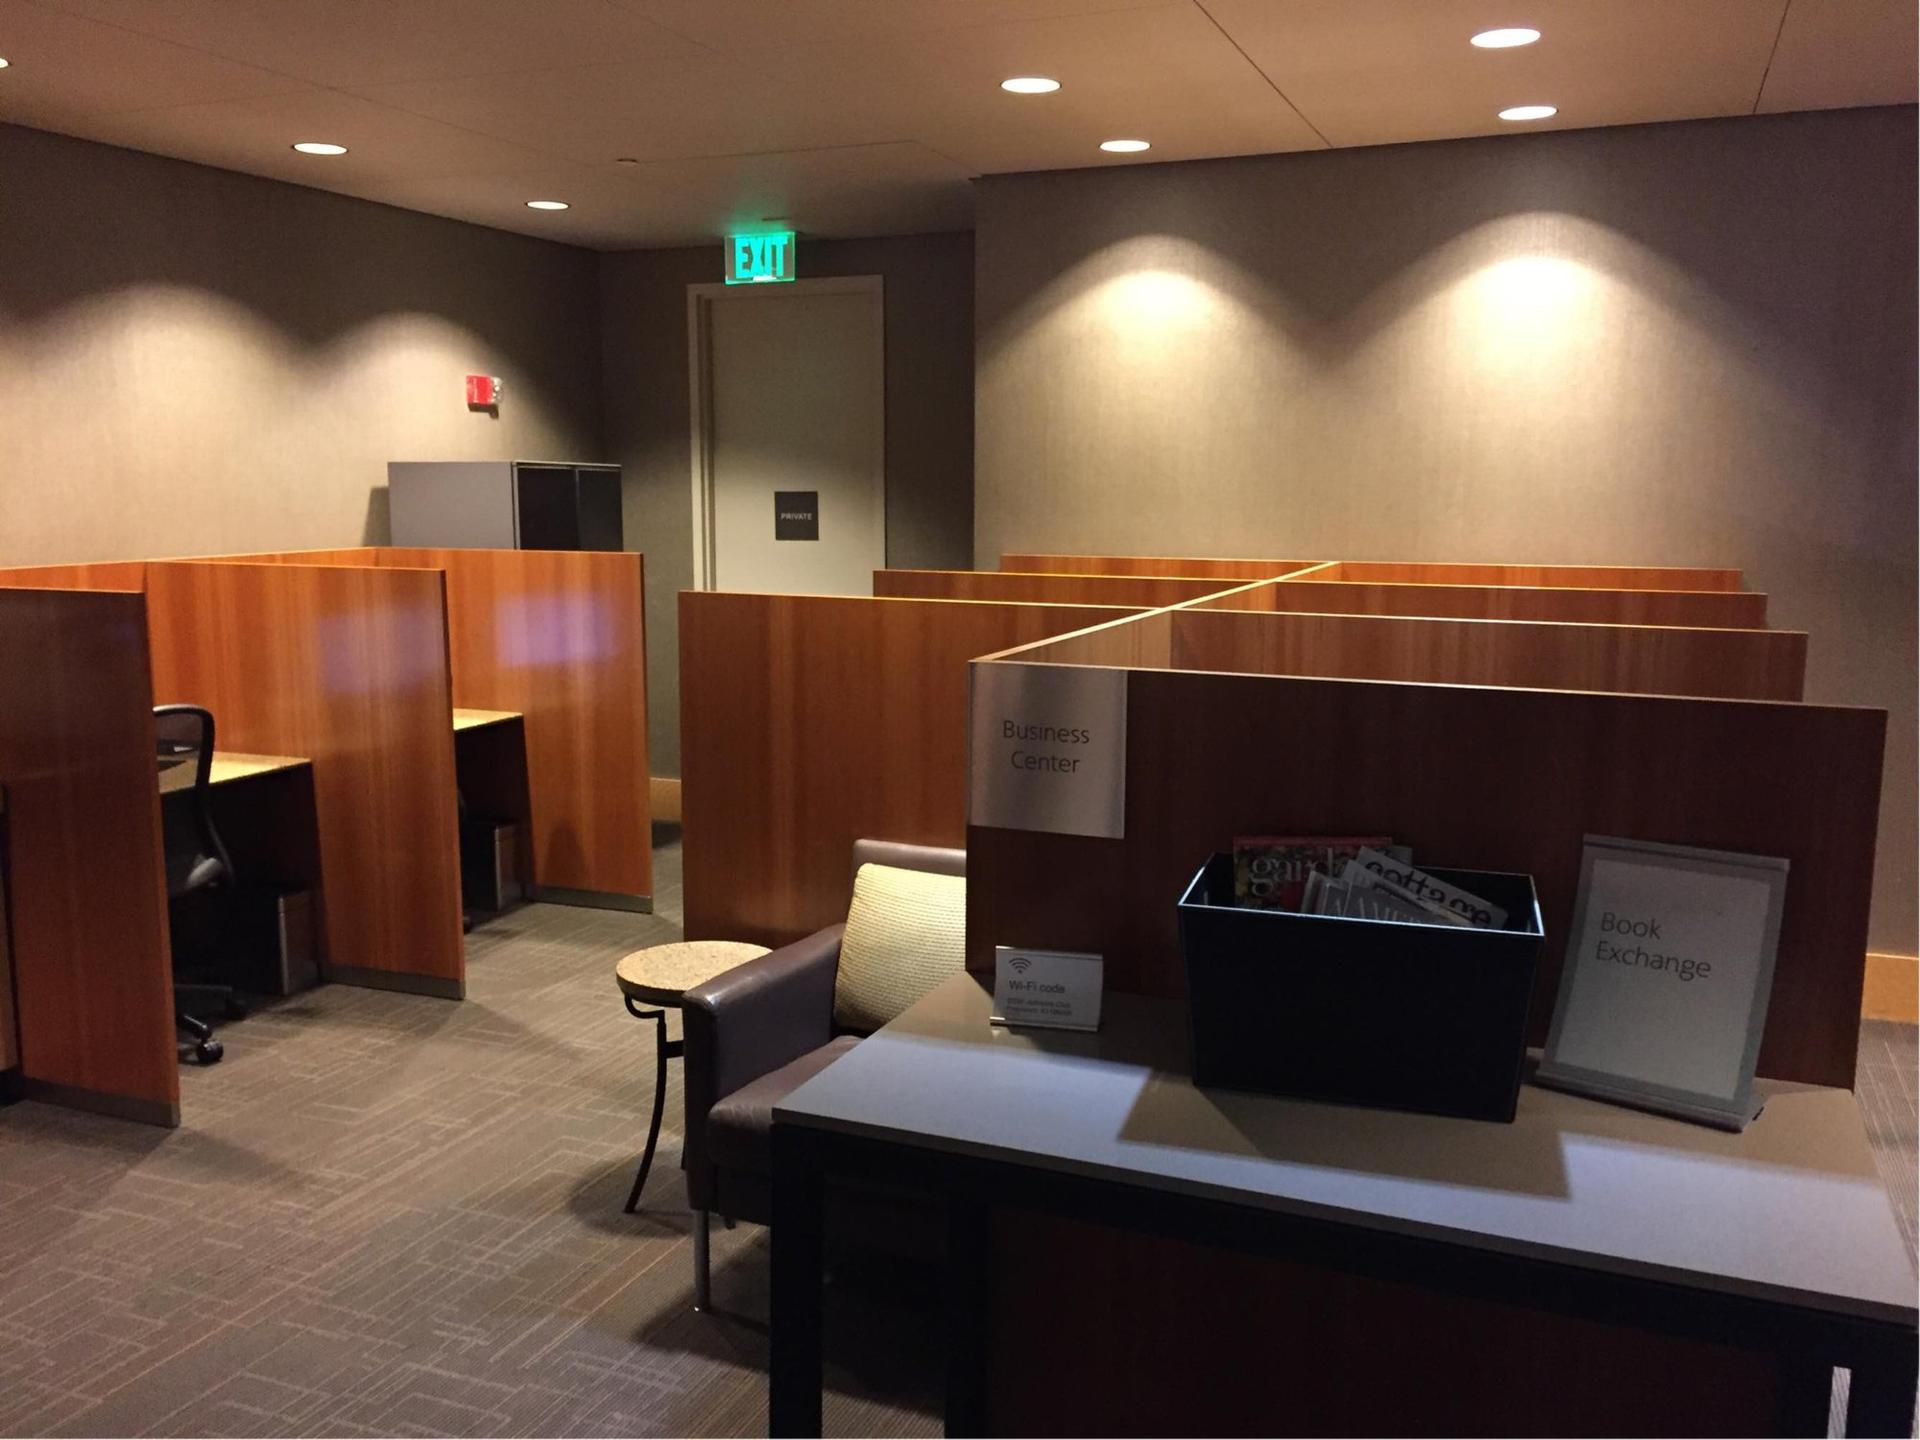 American Airlines Admirals Club image 6 of 14